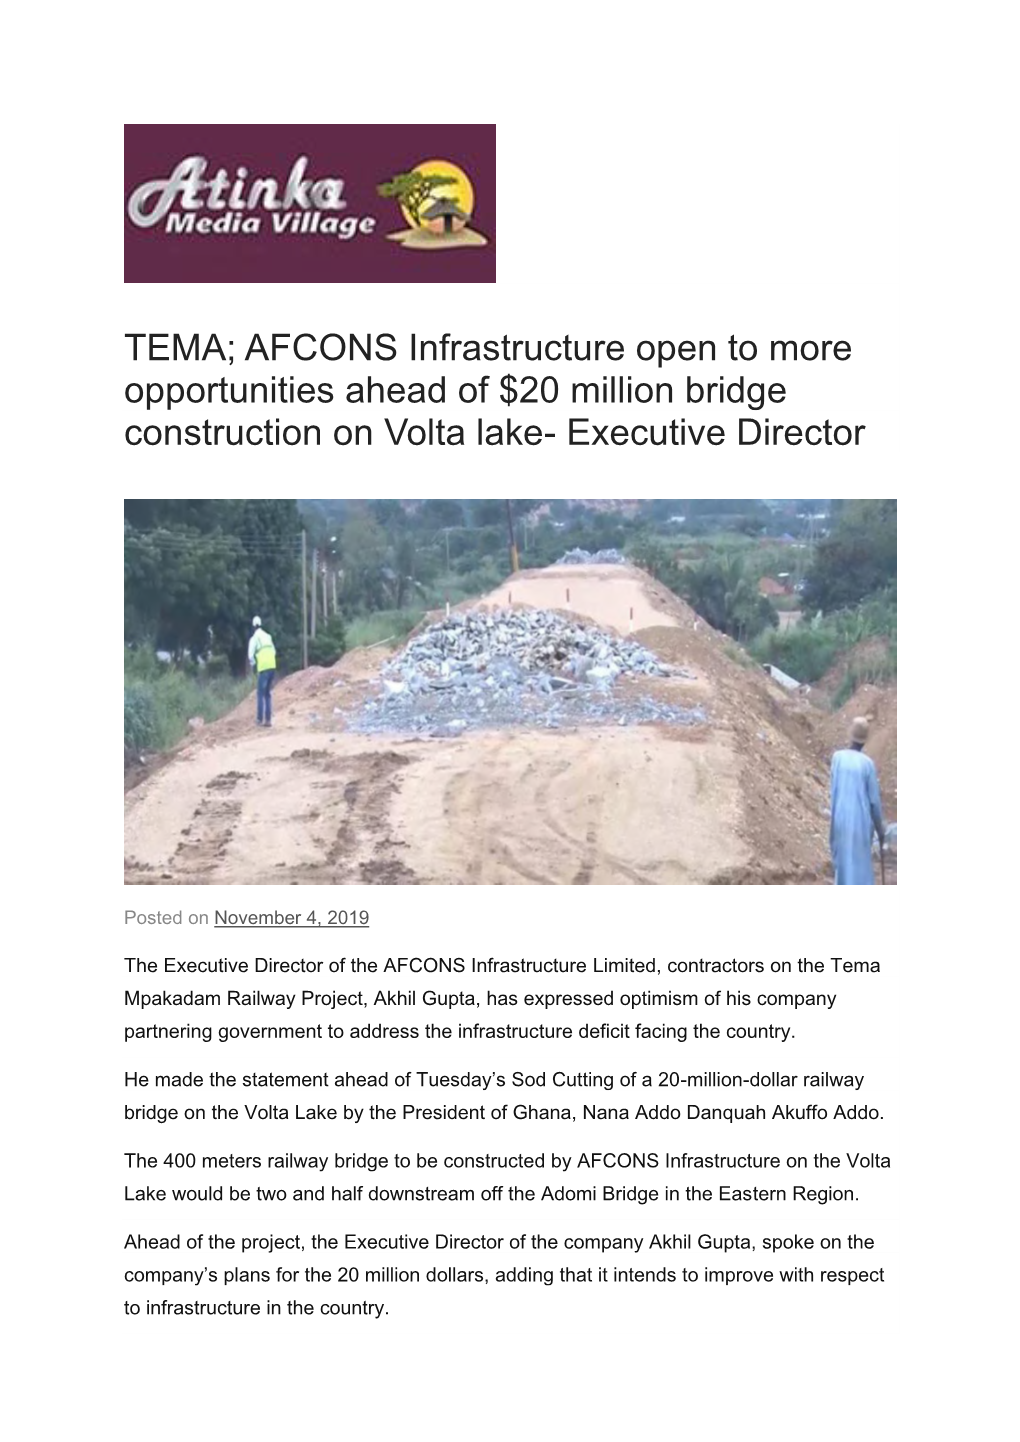 TEMA; AFCONS Infrastructure Open to More Opportunities Ahead of $20 Million Bridge Construction on Volta Lake- Executive Director